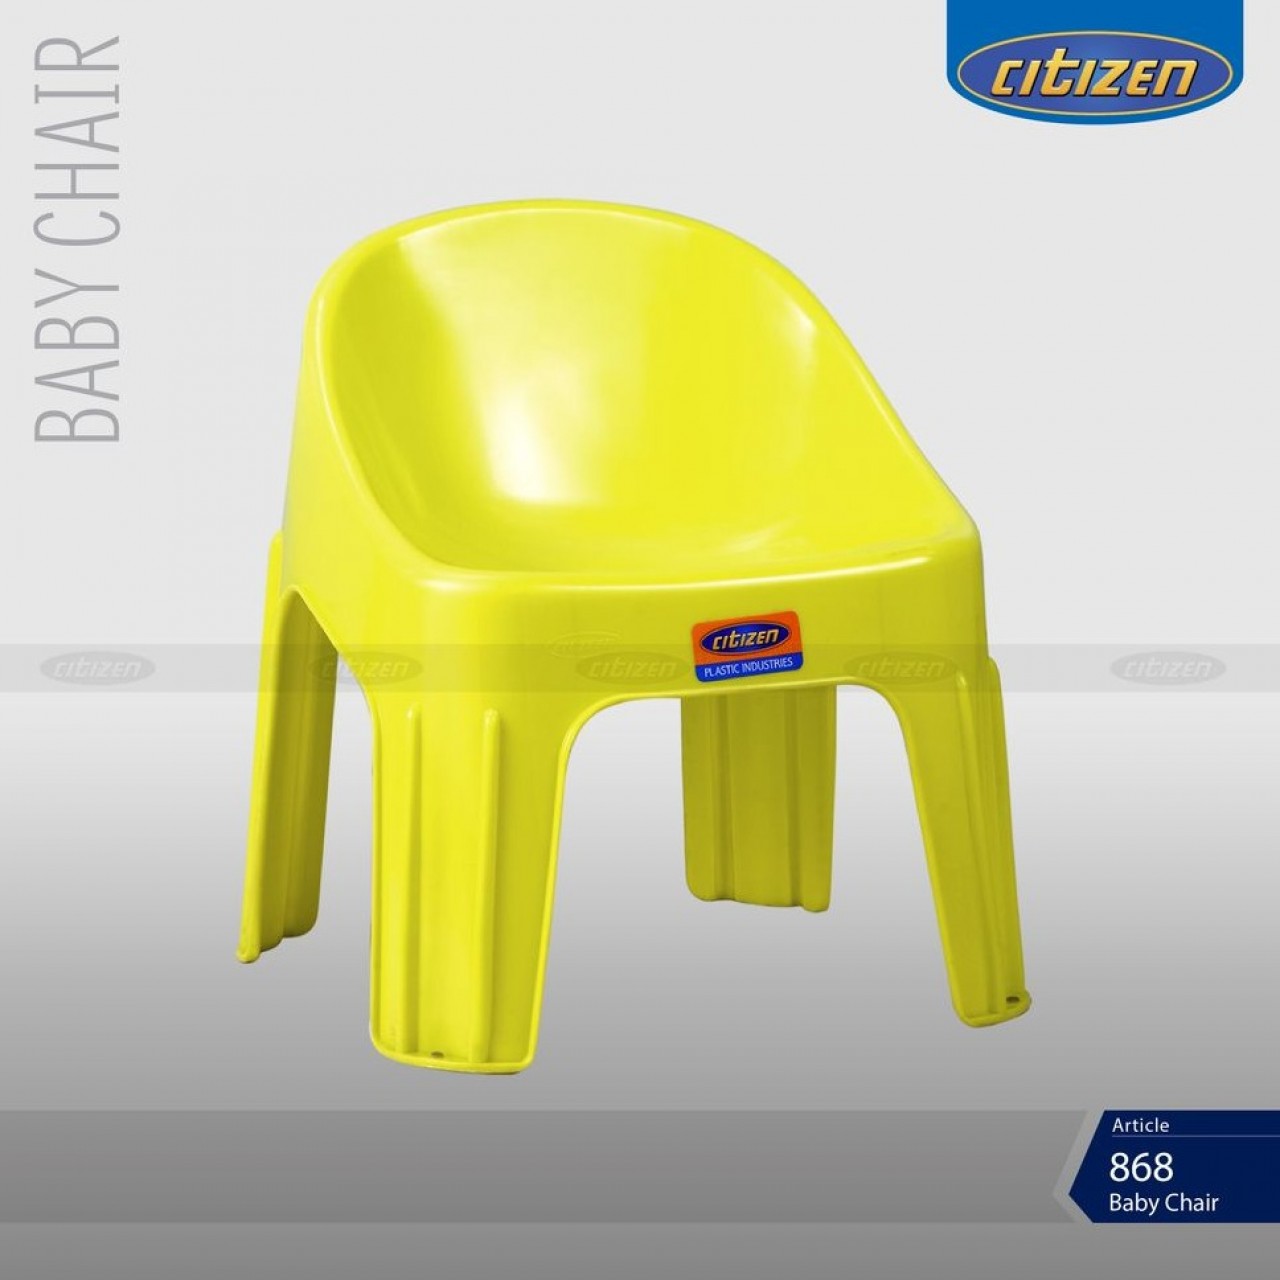 Citizen 868 Plastic & Crystal Baby Chair